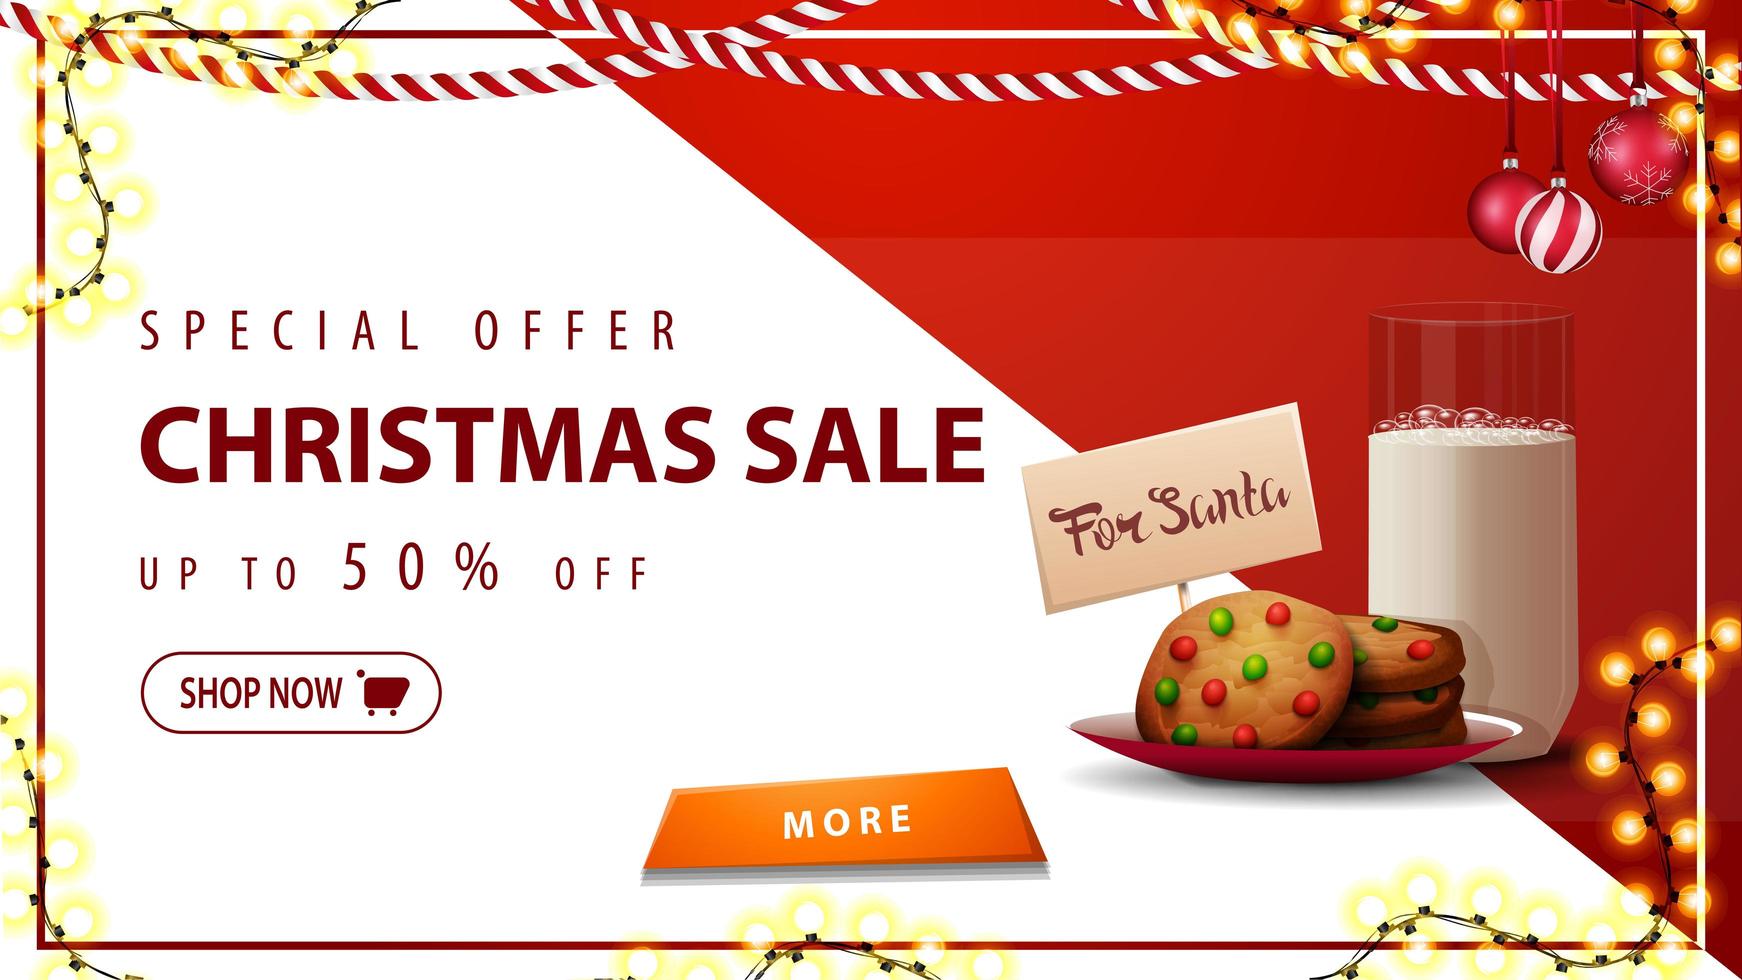 Special offer, Christmas sale, up to 50 off, horizontal white and red discount banner with garlands, button and cookies with a glass of milk for Santa Claus vector